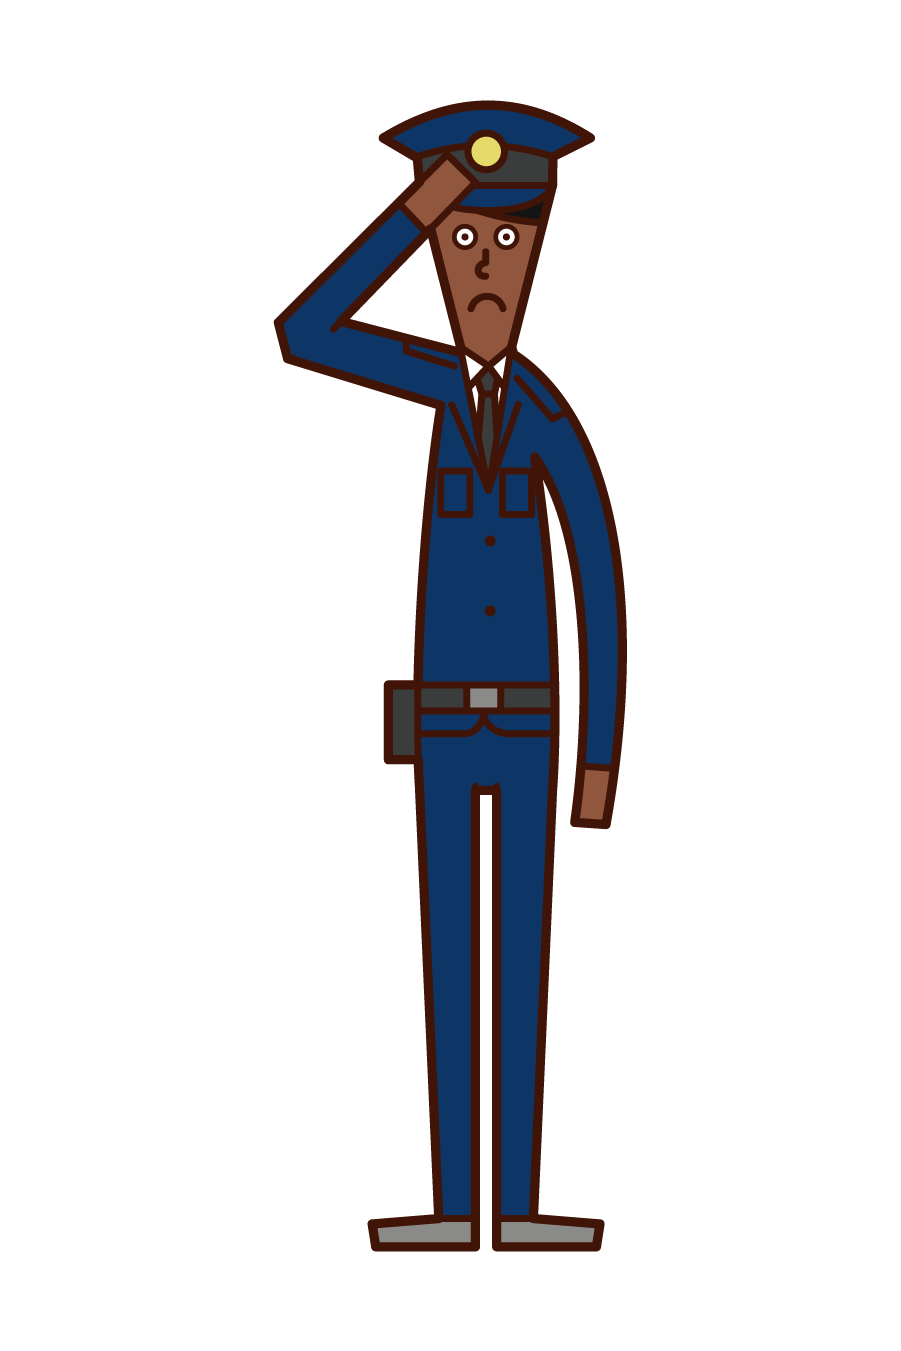 Illustration of a police officer (man) salute